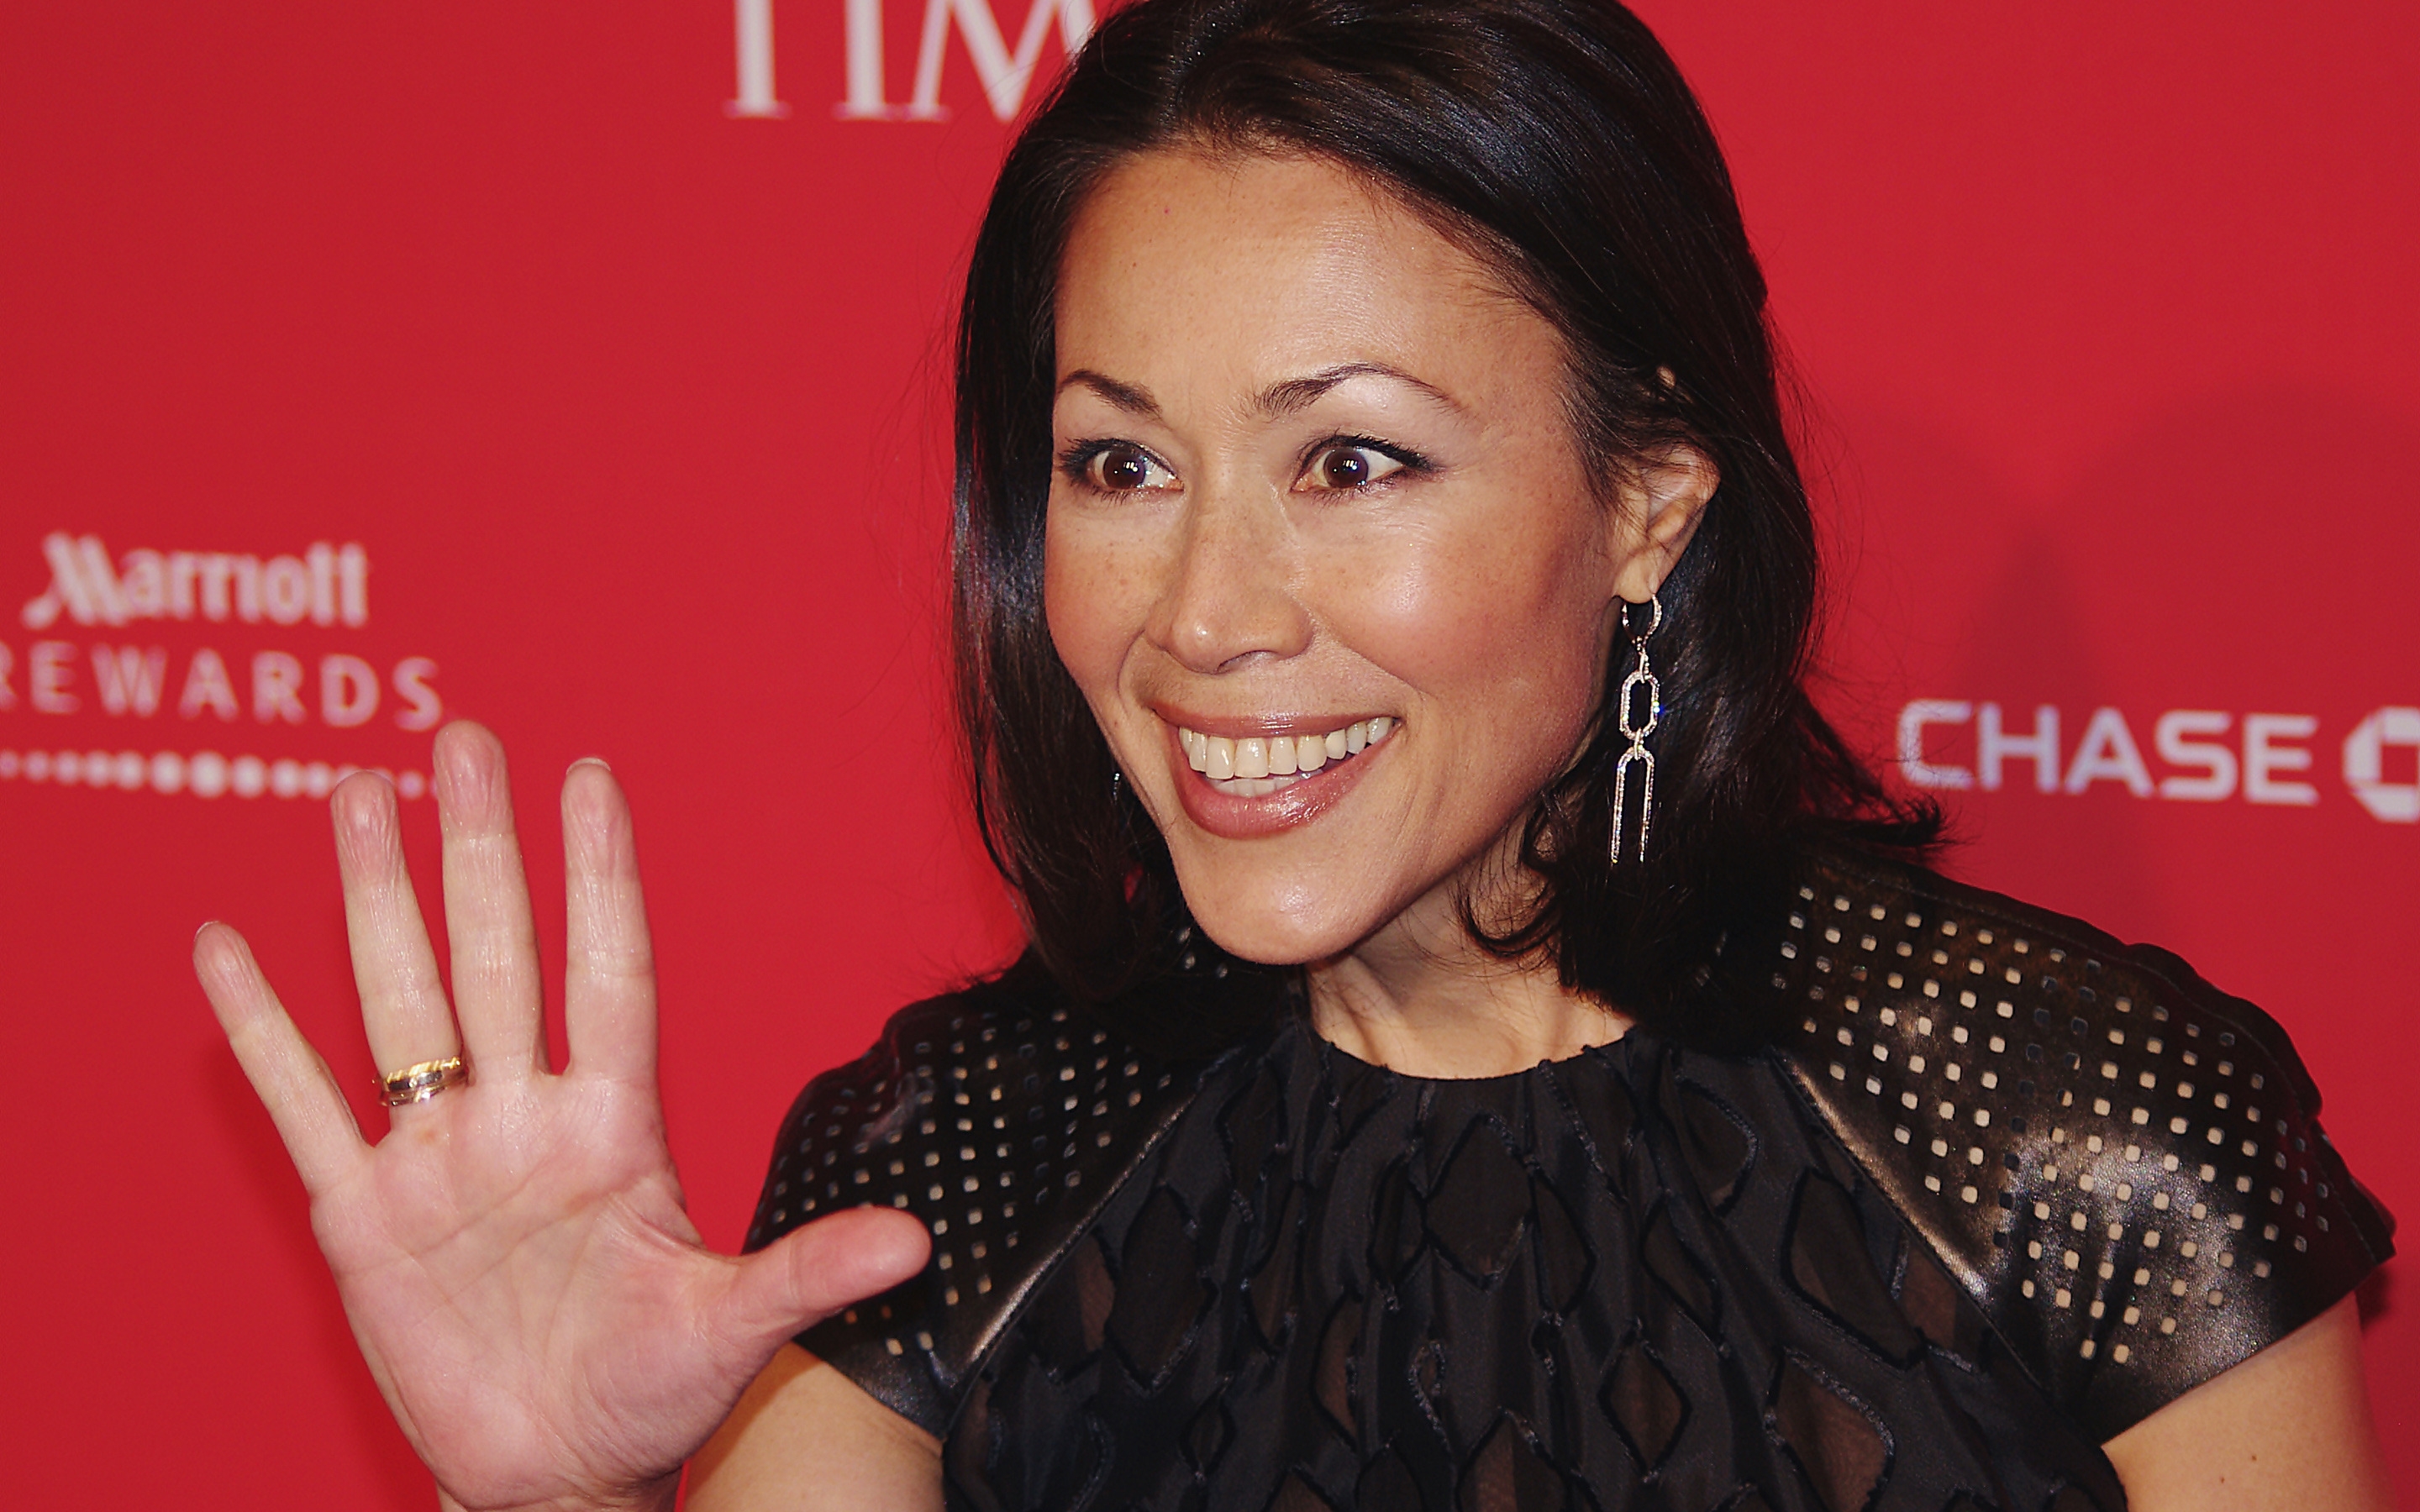 Ann Curry Look for 2880 x 1800 Retina Display resolution